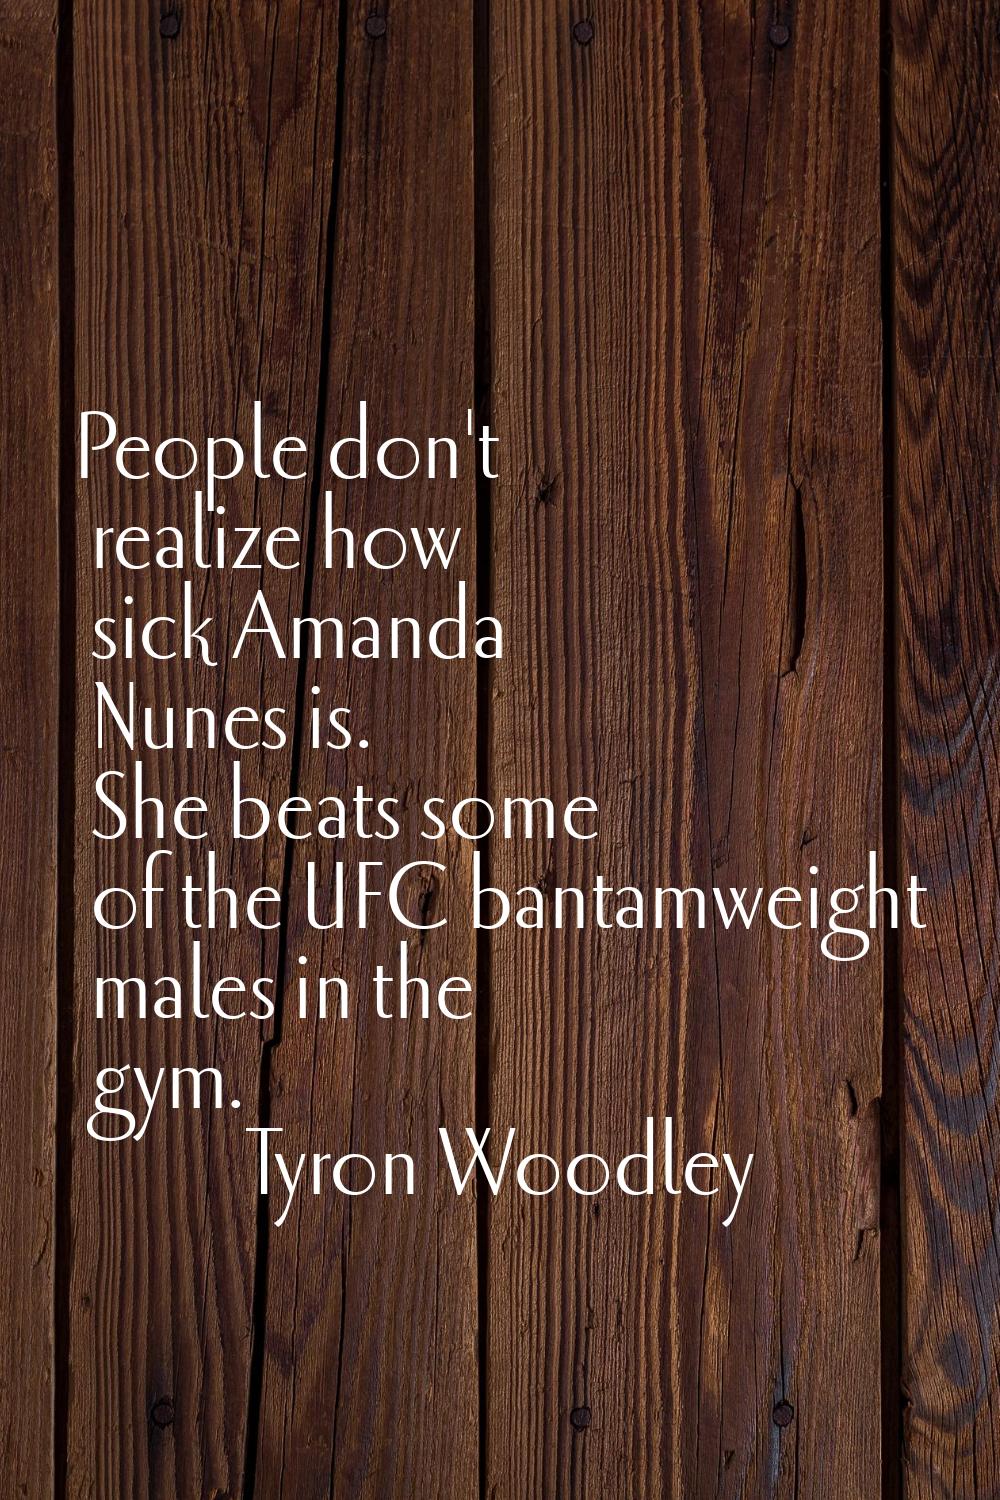 People don't realize how sick Amanda Nunes is. She beats some of the UFC bantamweight males in the 